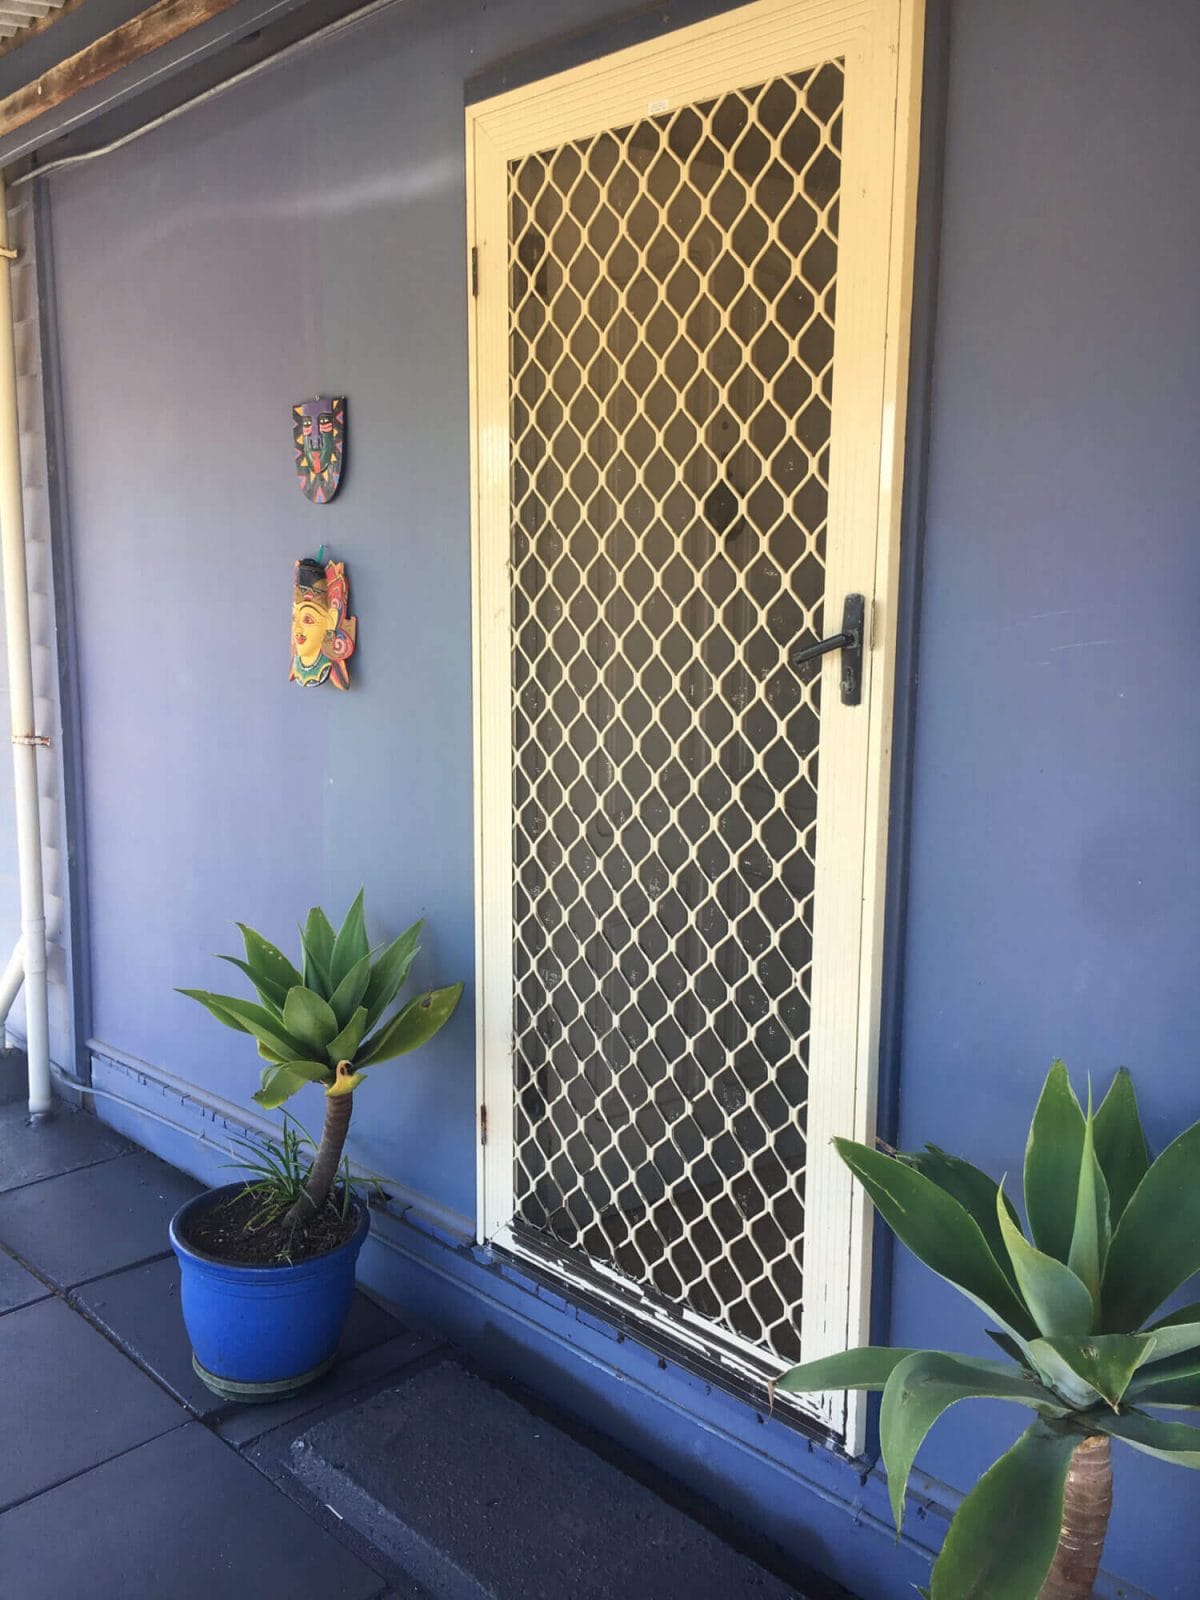 Weekender - Accommodation in Bremer Bay - 21 Barbara Street. Welcome - Main access door to house